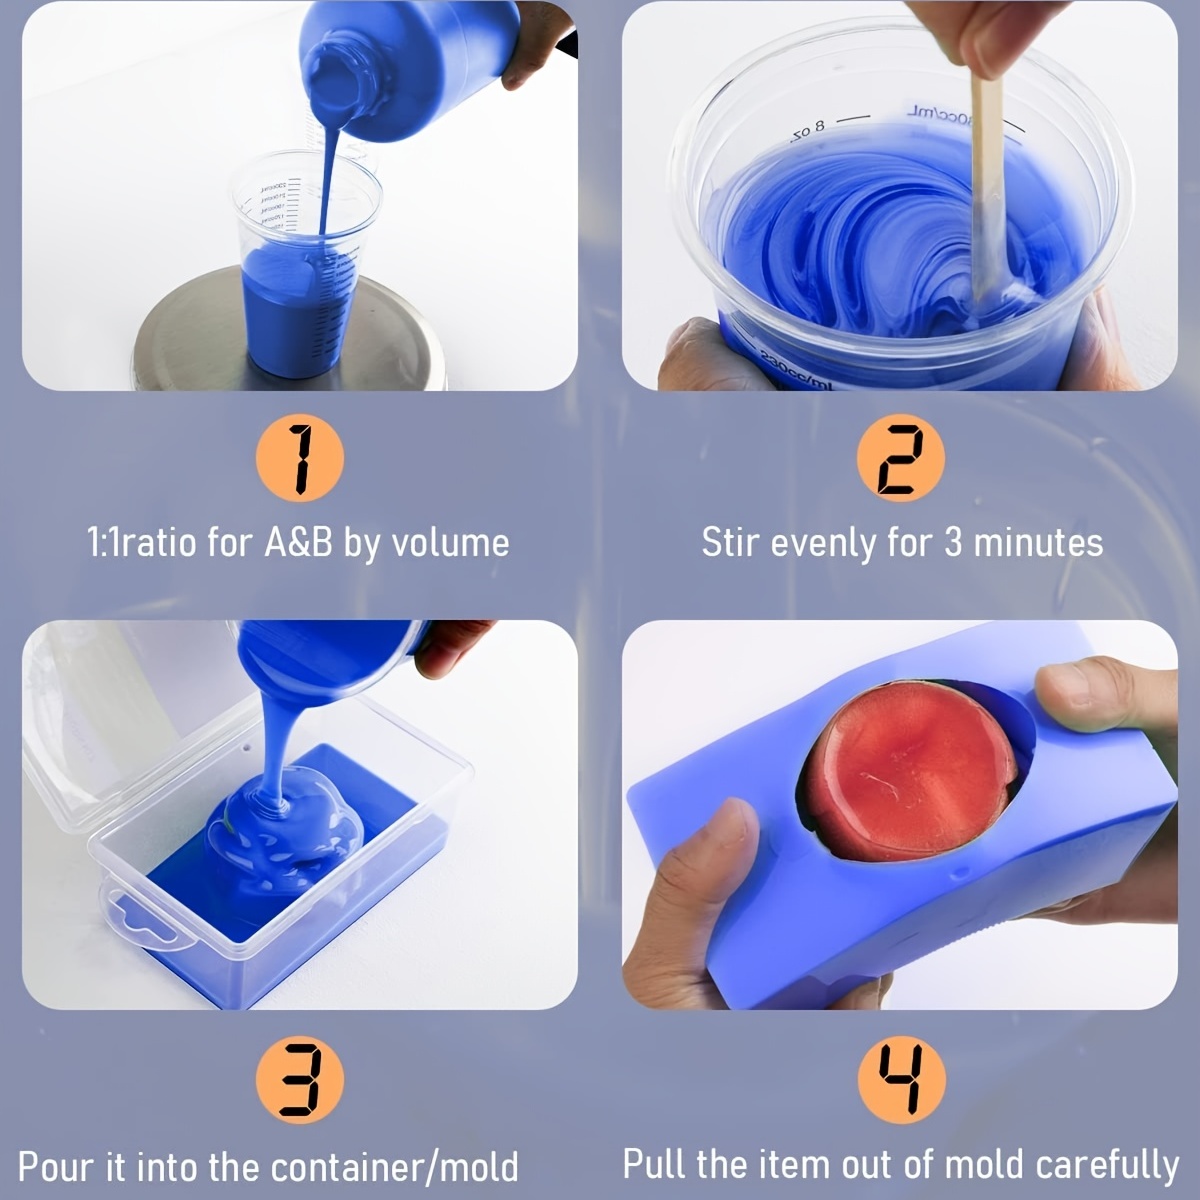 Silicone Rubber Mold Material, an introduction - The Blue Bottle Tree